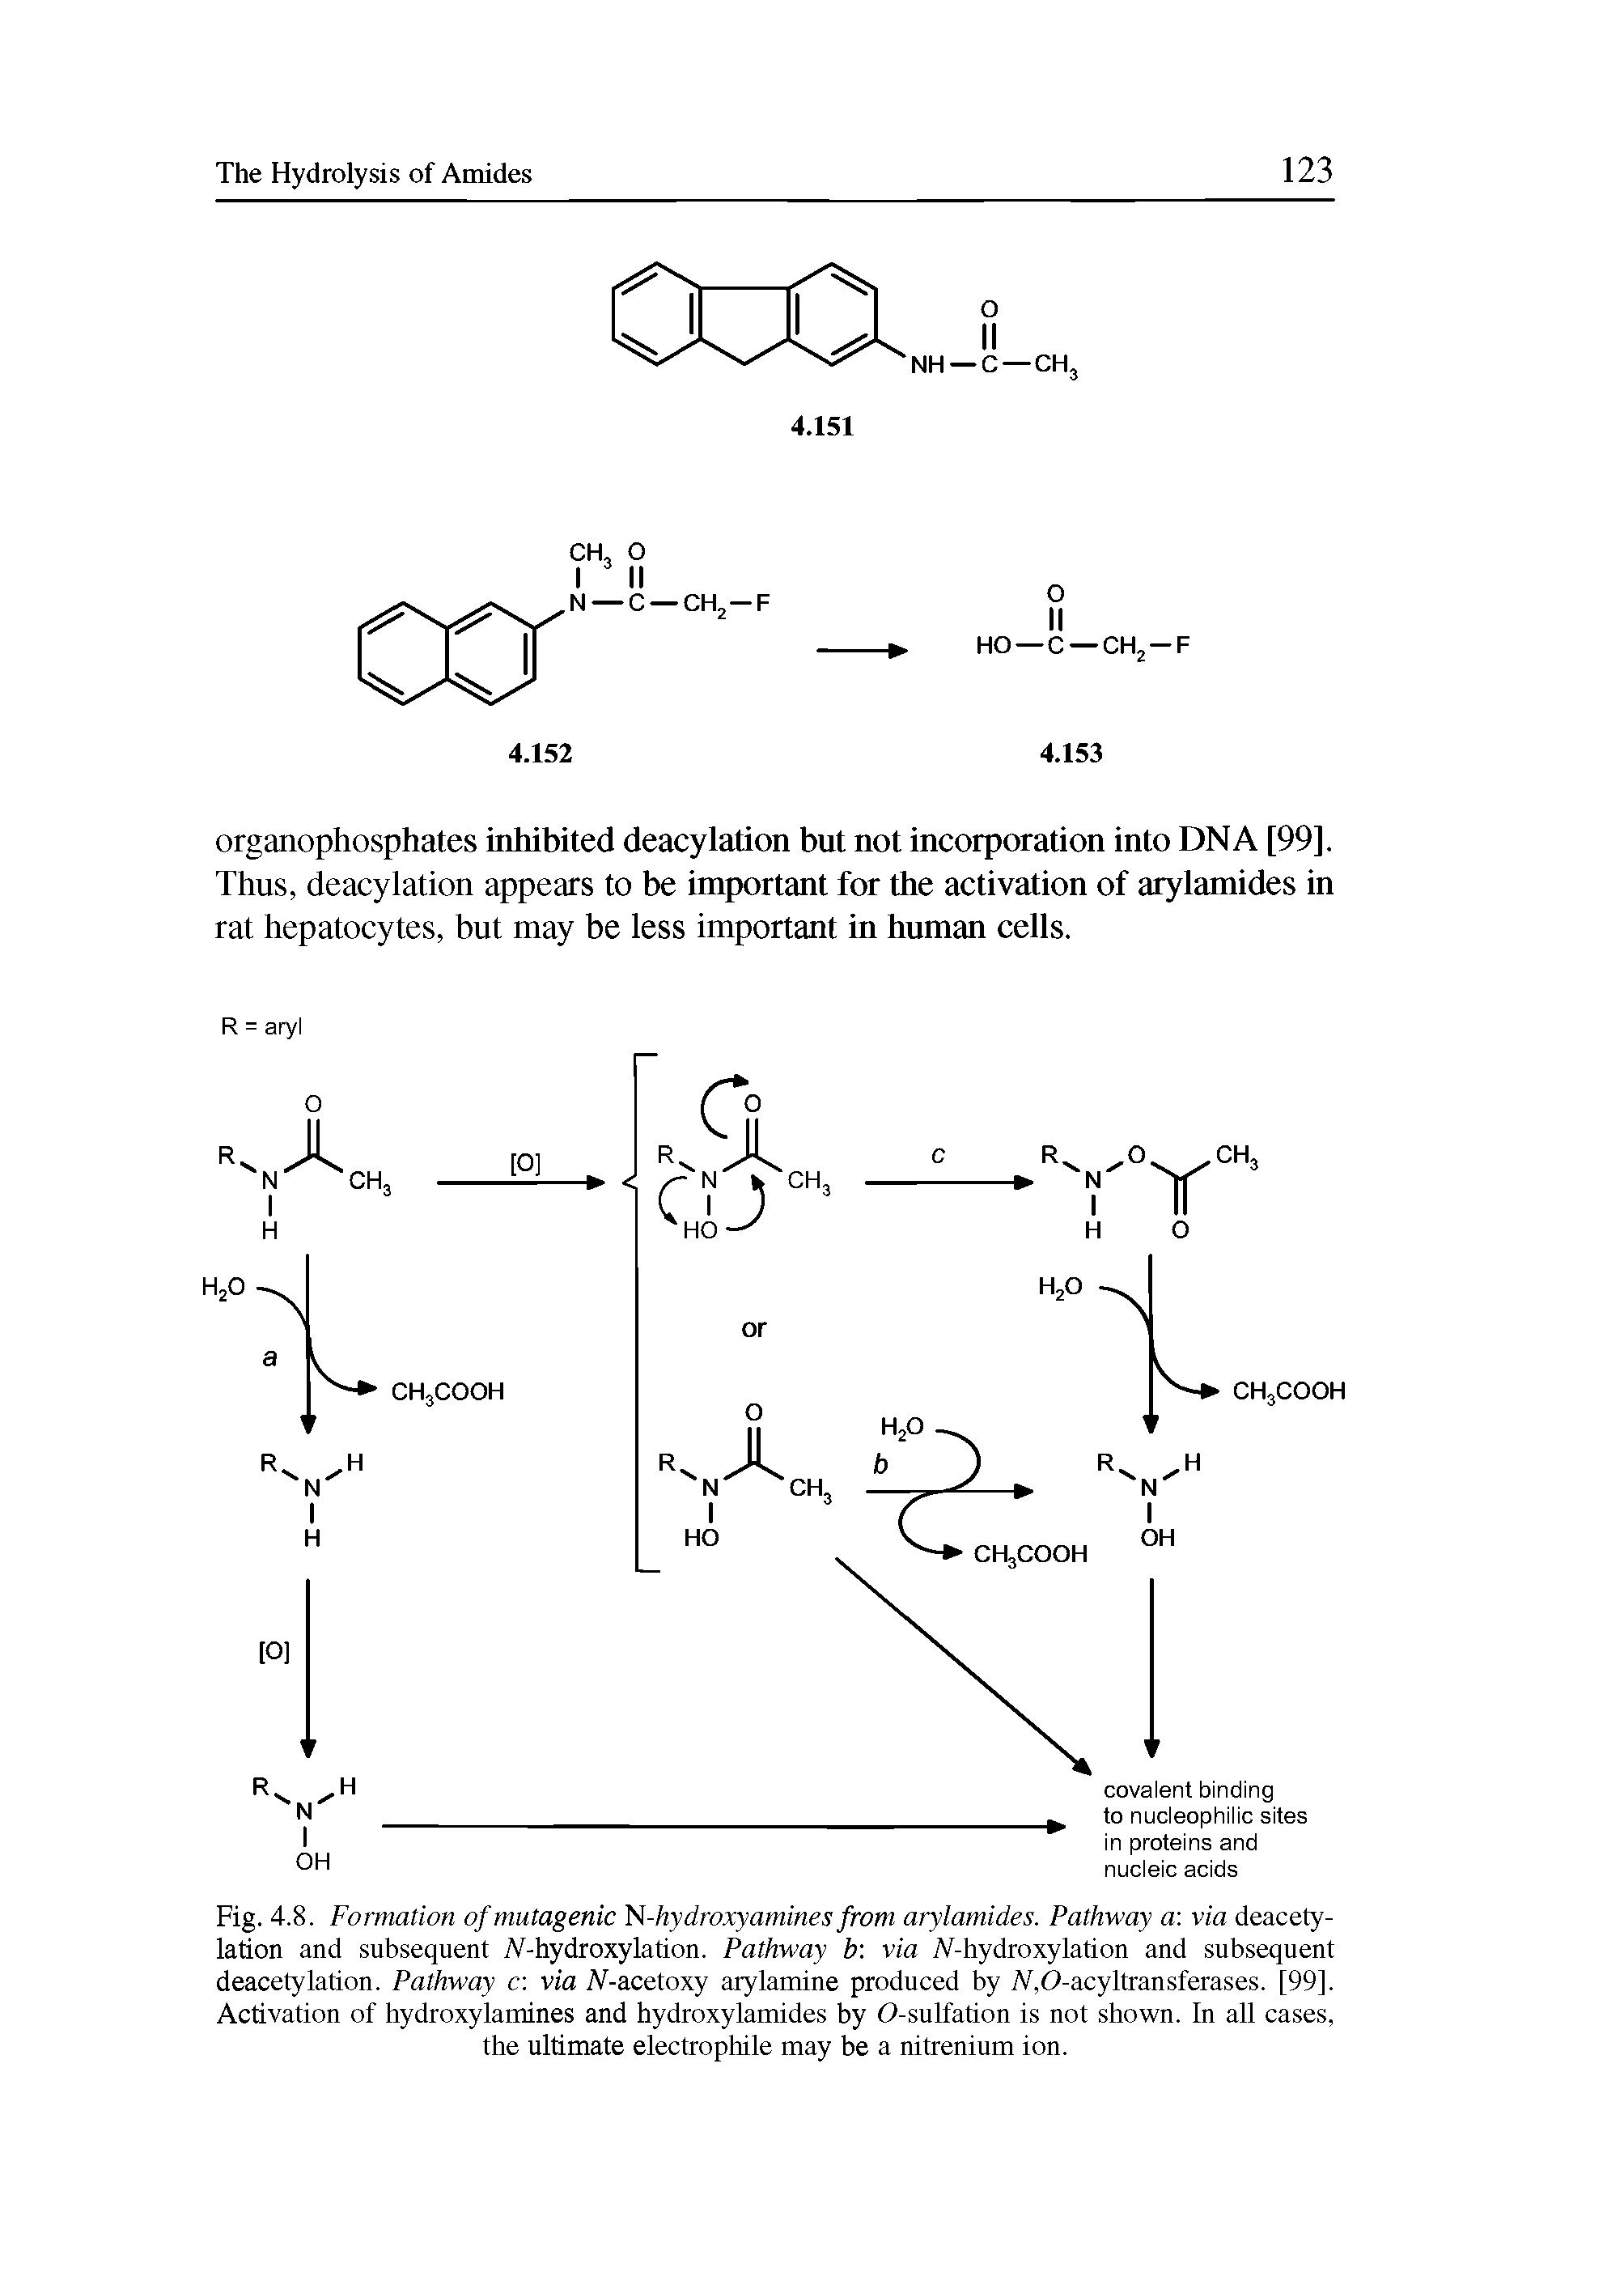 Fig. 4.8. Formation of mutagenic N-hydroxyamines from arylamides. Pathway a via deacetylation and subsequent IV-hydroxylation. Pathway b via IV-hydroxylation and subsequent deacetylation. Pathway c via N-acetoxy arylamine produced by IV,0-acyltransferases. [99]. Activation of hydroxylamines and hydroxylamides by O-sulfation is not shown. In all cases, the ultimate electrophile may be a nitrenium ion.